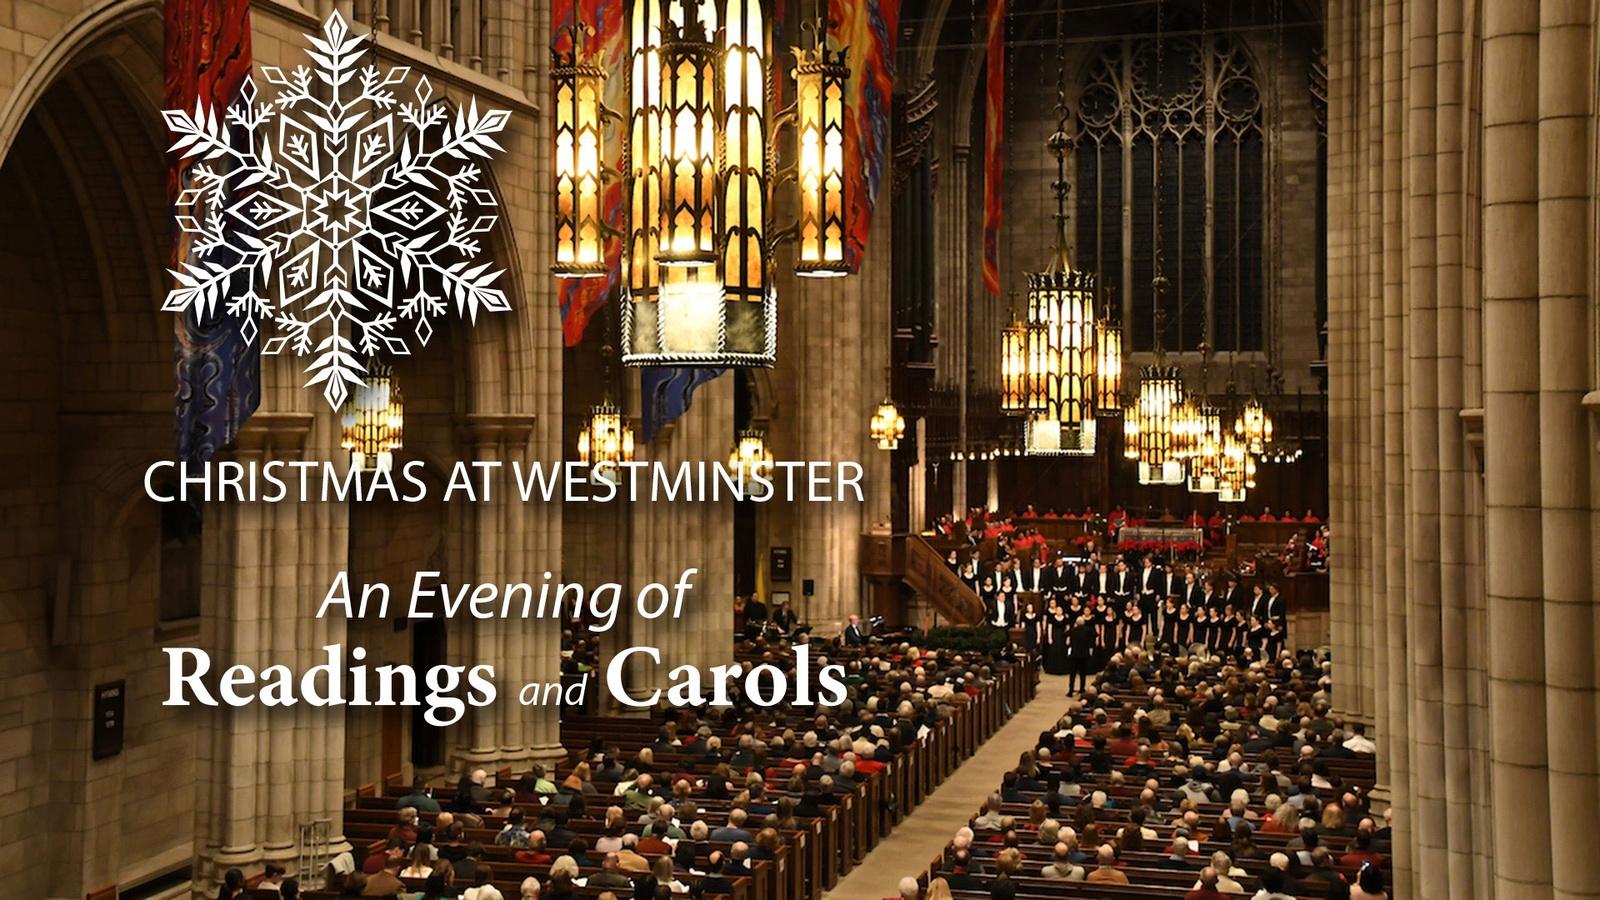 CHRISTMAS AT WESTMINSTER: <br/>AN EVENING OF READINGS AND CAROLS